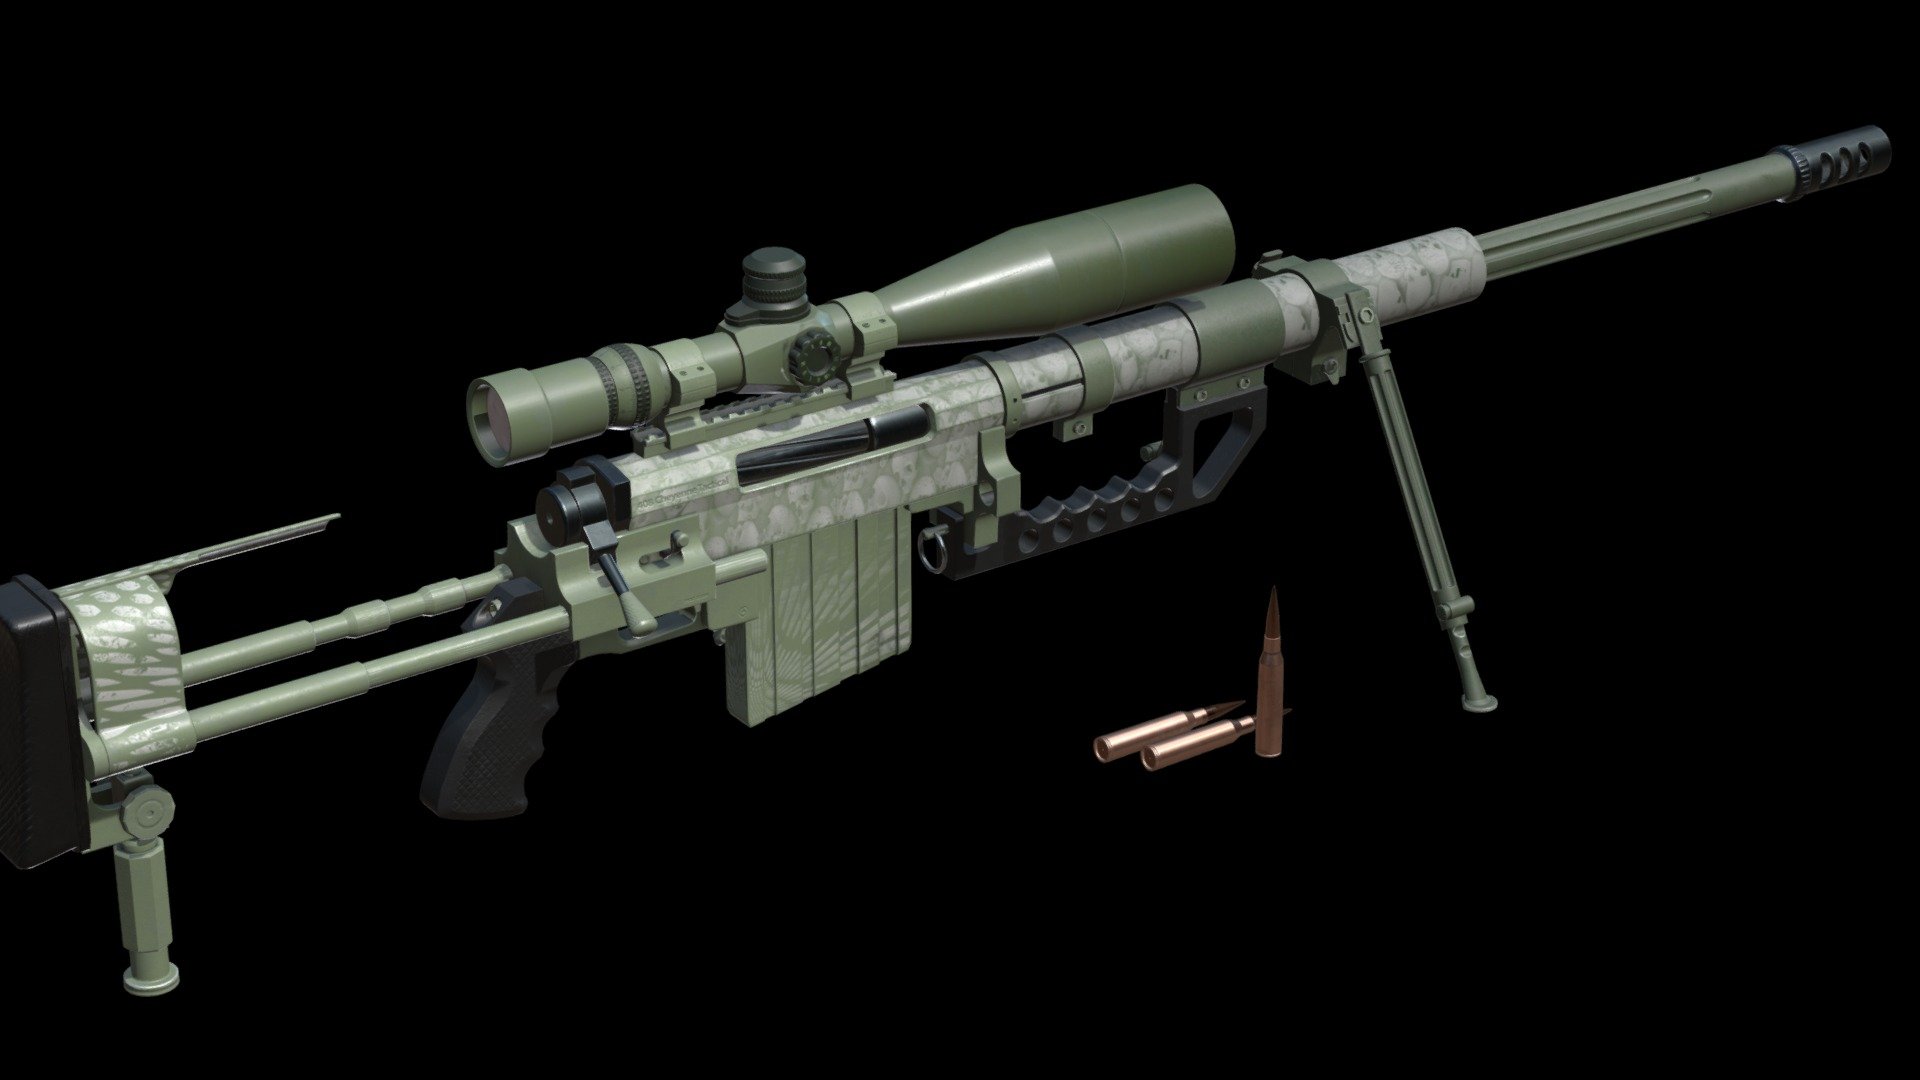 The CheyTac Intervention is an American bolt-action sniper rifle manufactured by CheyTac USA

Game Ready realistic model with right proportions

3 packs of textures, camouflage is unique and handmade:

Rifle: 4K. Magazine: 2K. Optical: 2K

https://www.artstation.com/sannf4

If you want to use this model, feel free to contact me.
 - CheyTac M200 «Intervention» sniper rifle - Download Free 3D model by Aleksandr (@sannf4) 3d model